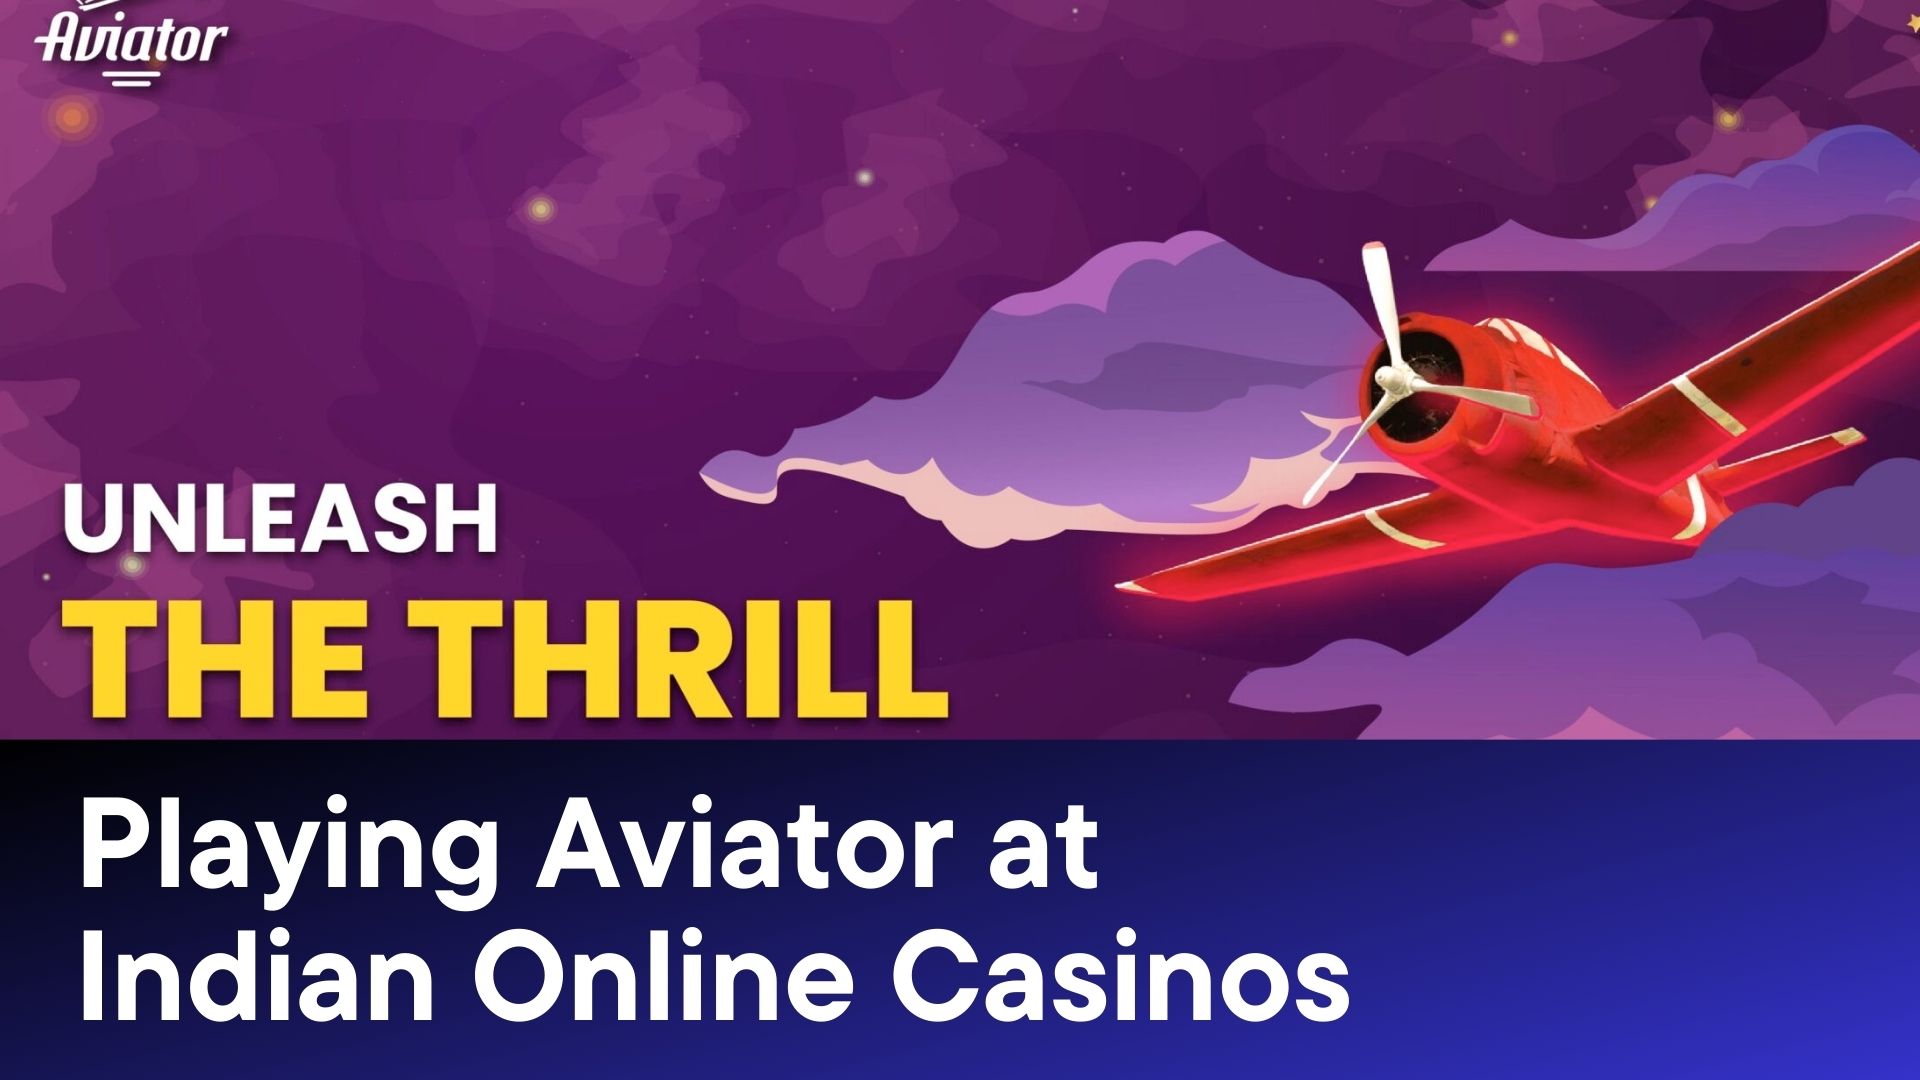 The Thrill of Playing Aviator at Indian Online Casinos